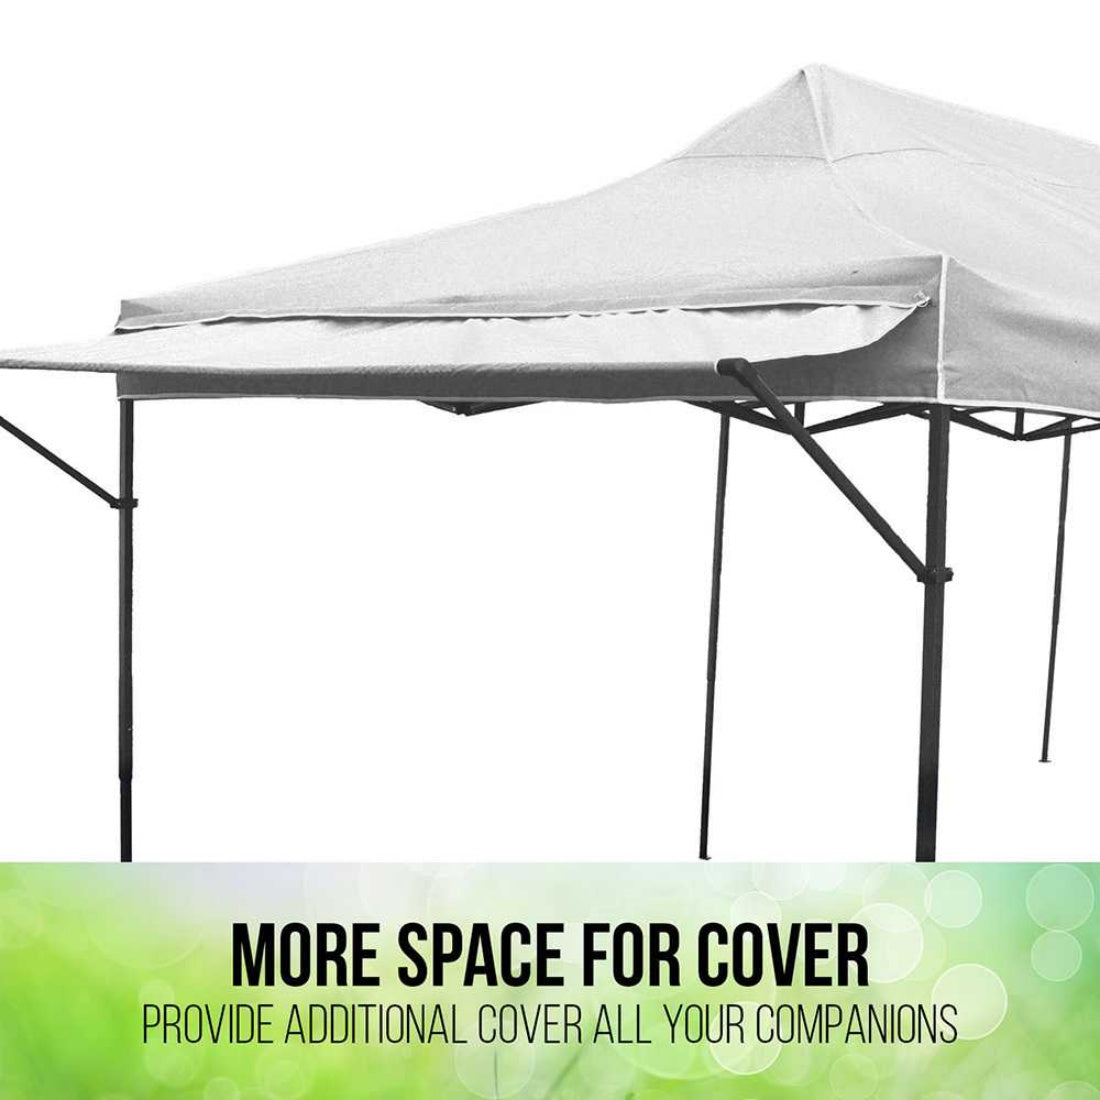 NEW PERFECT OASIS White Pop Up 3mx68cm Gazebo Eave Folding Marquee Tent Outdoor